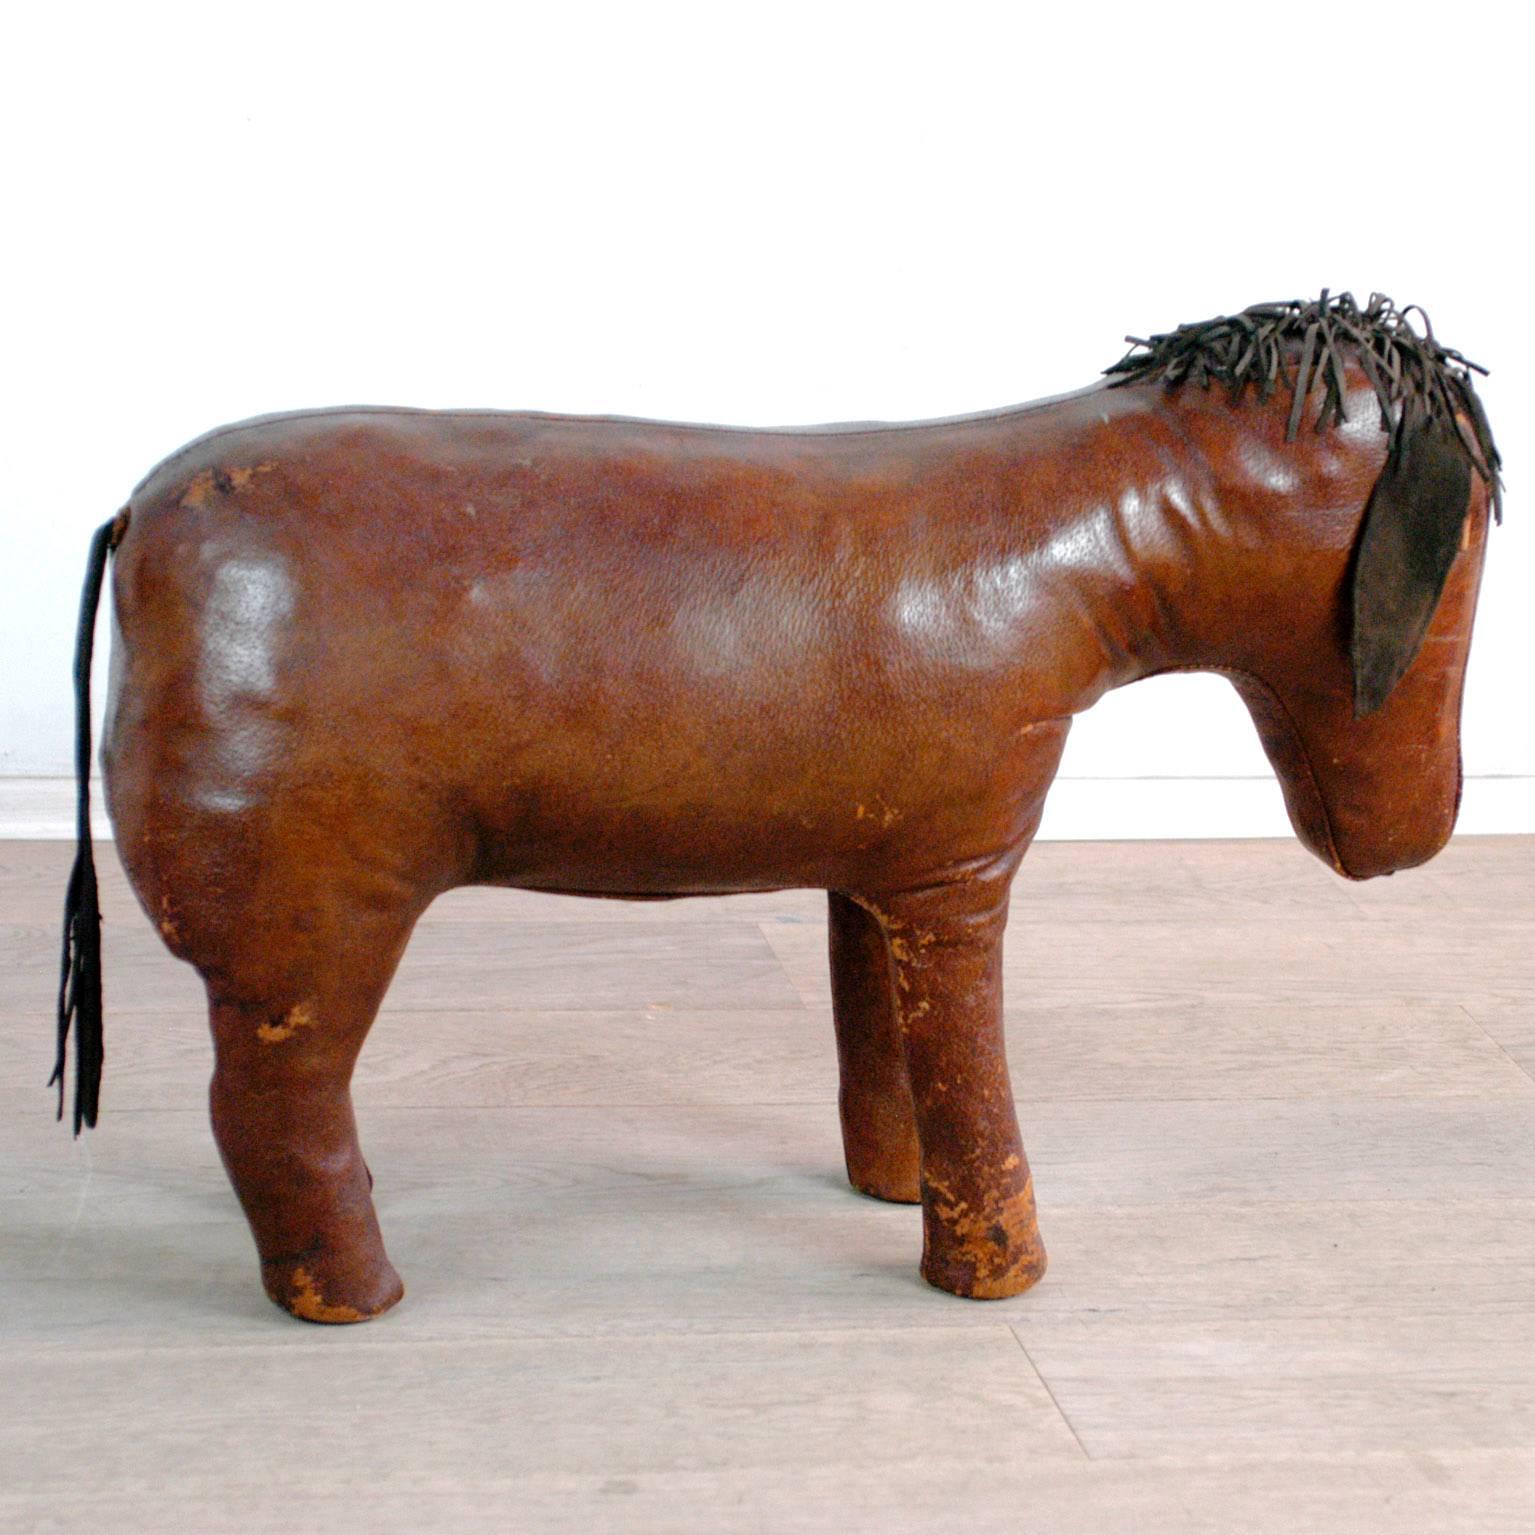 British Leather Donkey by Dimitri Omersa for Abercrombie & Fitch